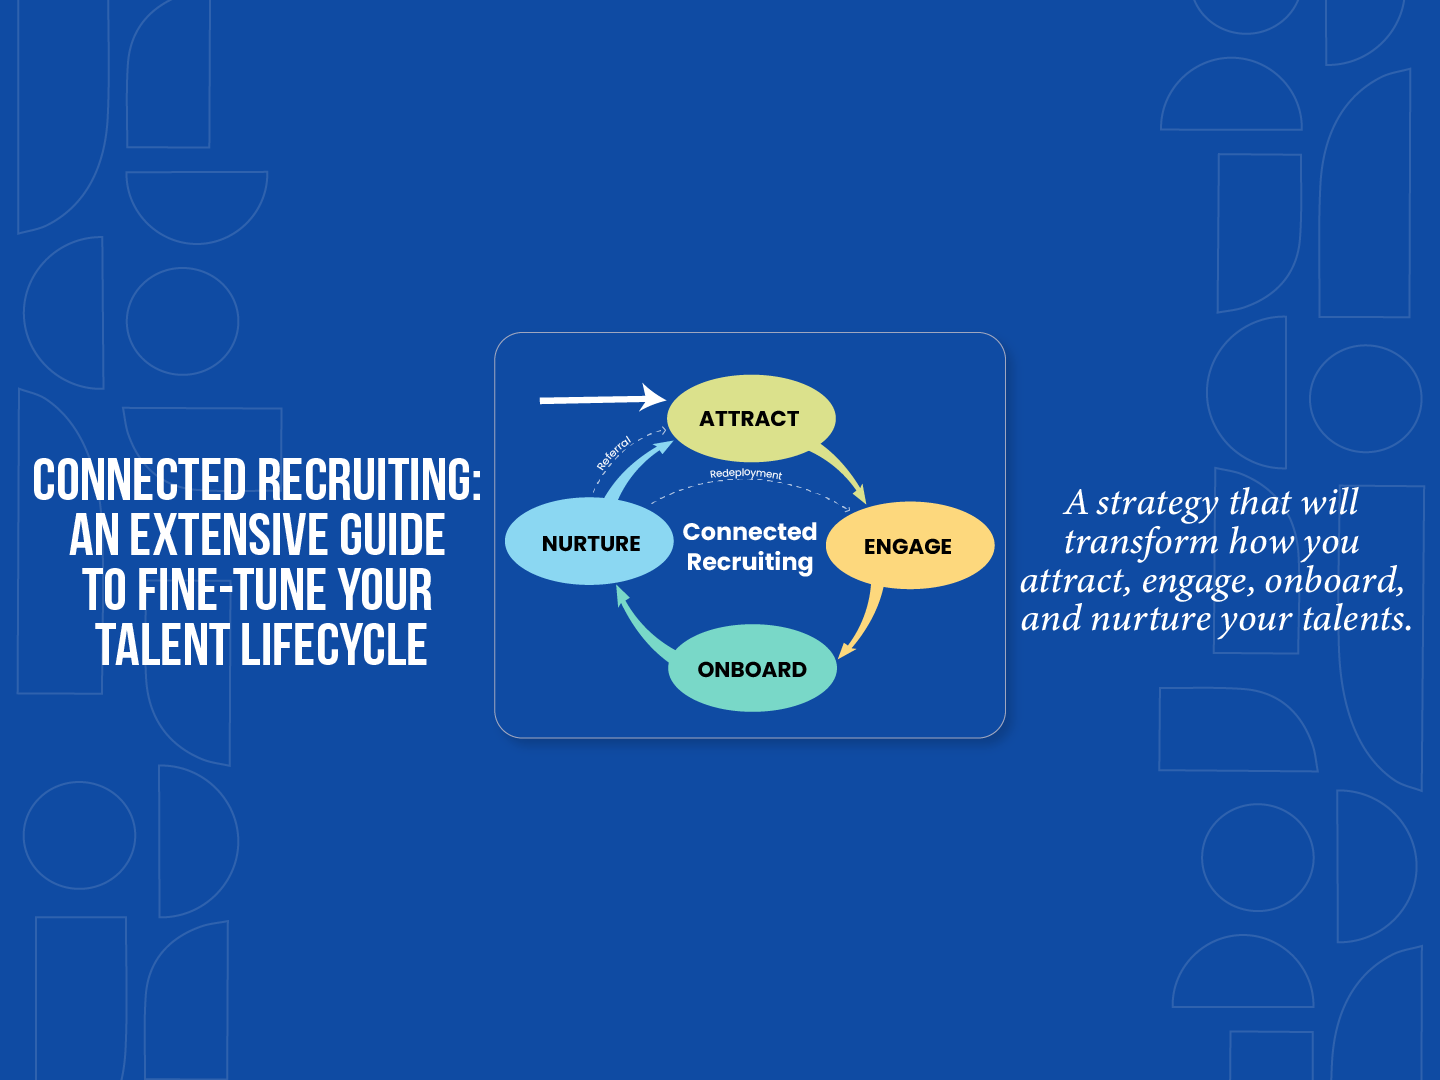 Connected Recruiting- An Extensive Guide to Fine-Tune Your Talent Lifecycle